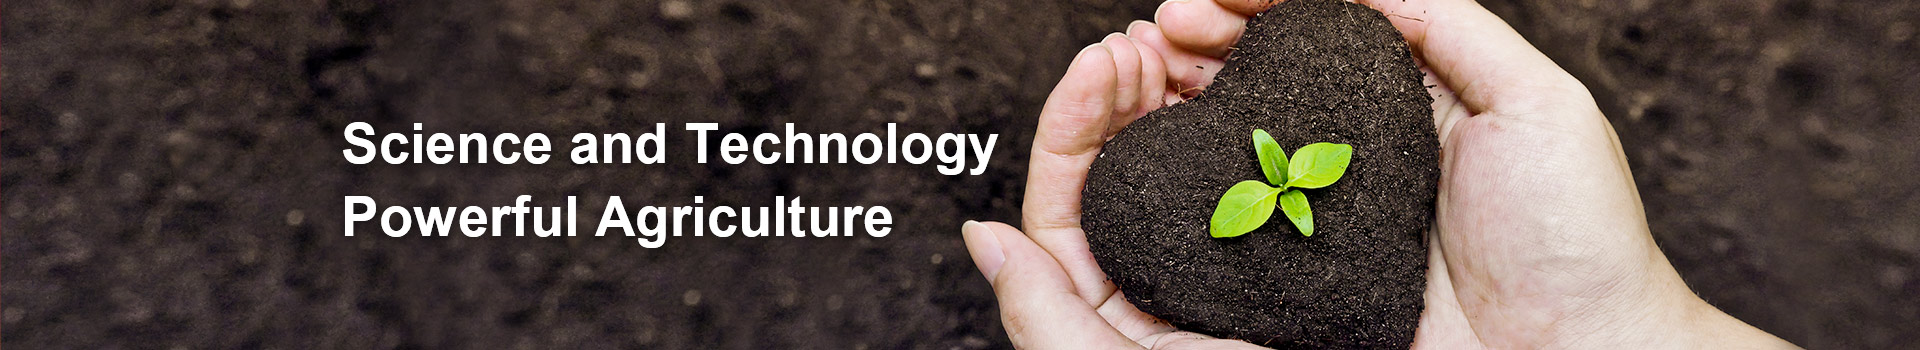 Science and Technology Powerful Agriculture